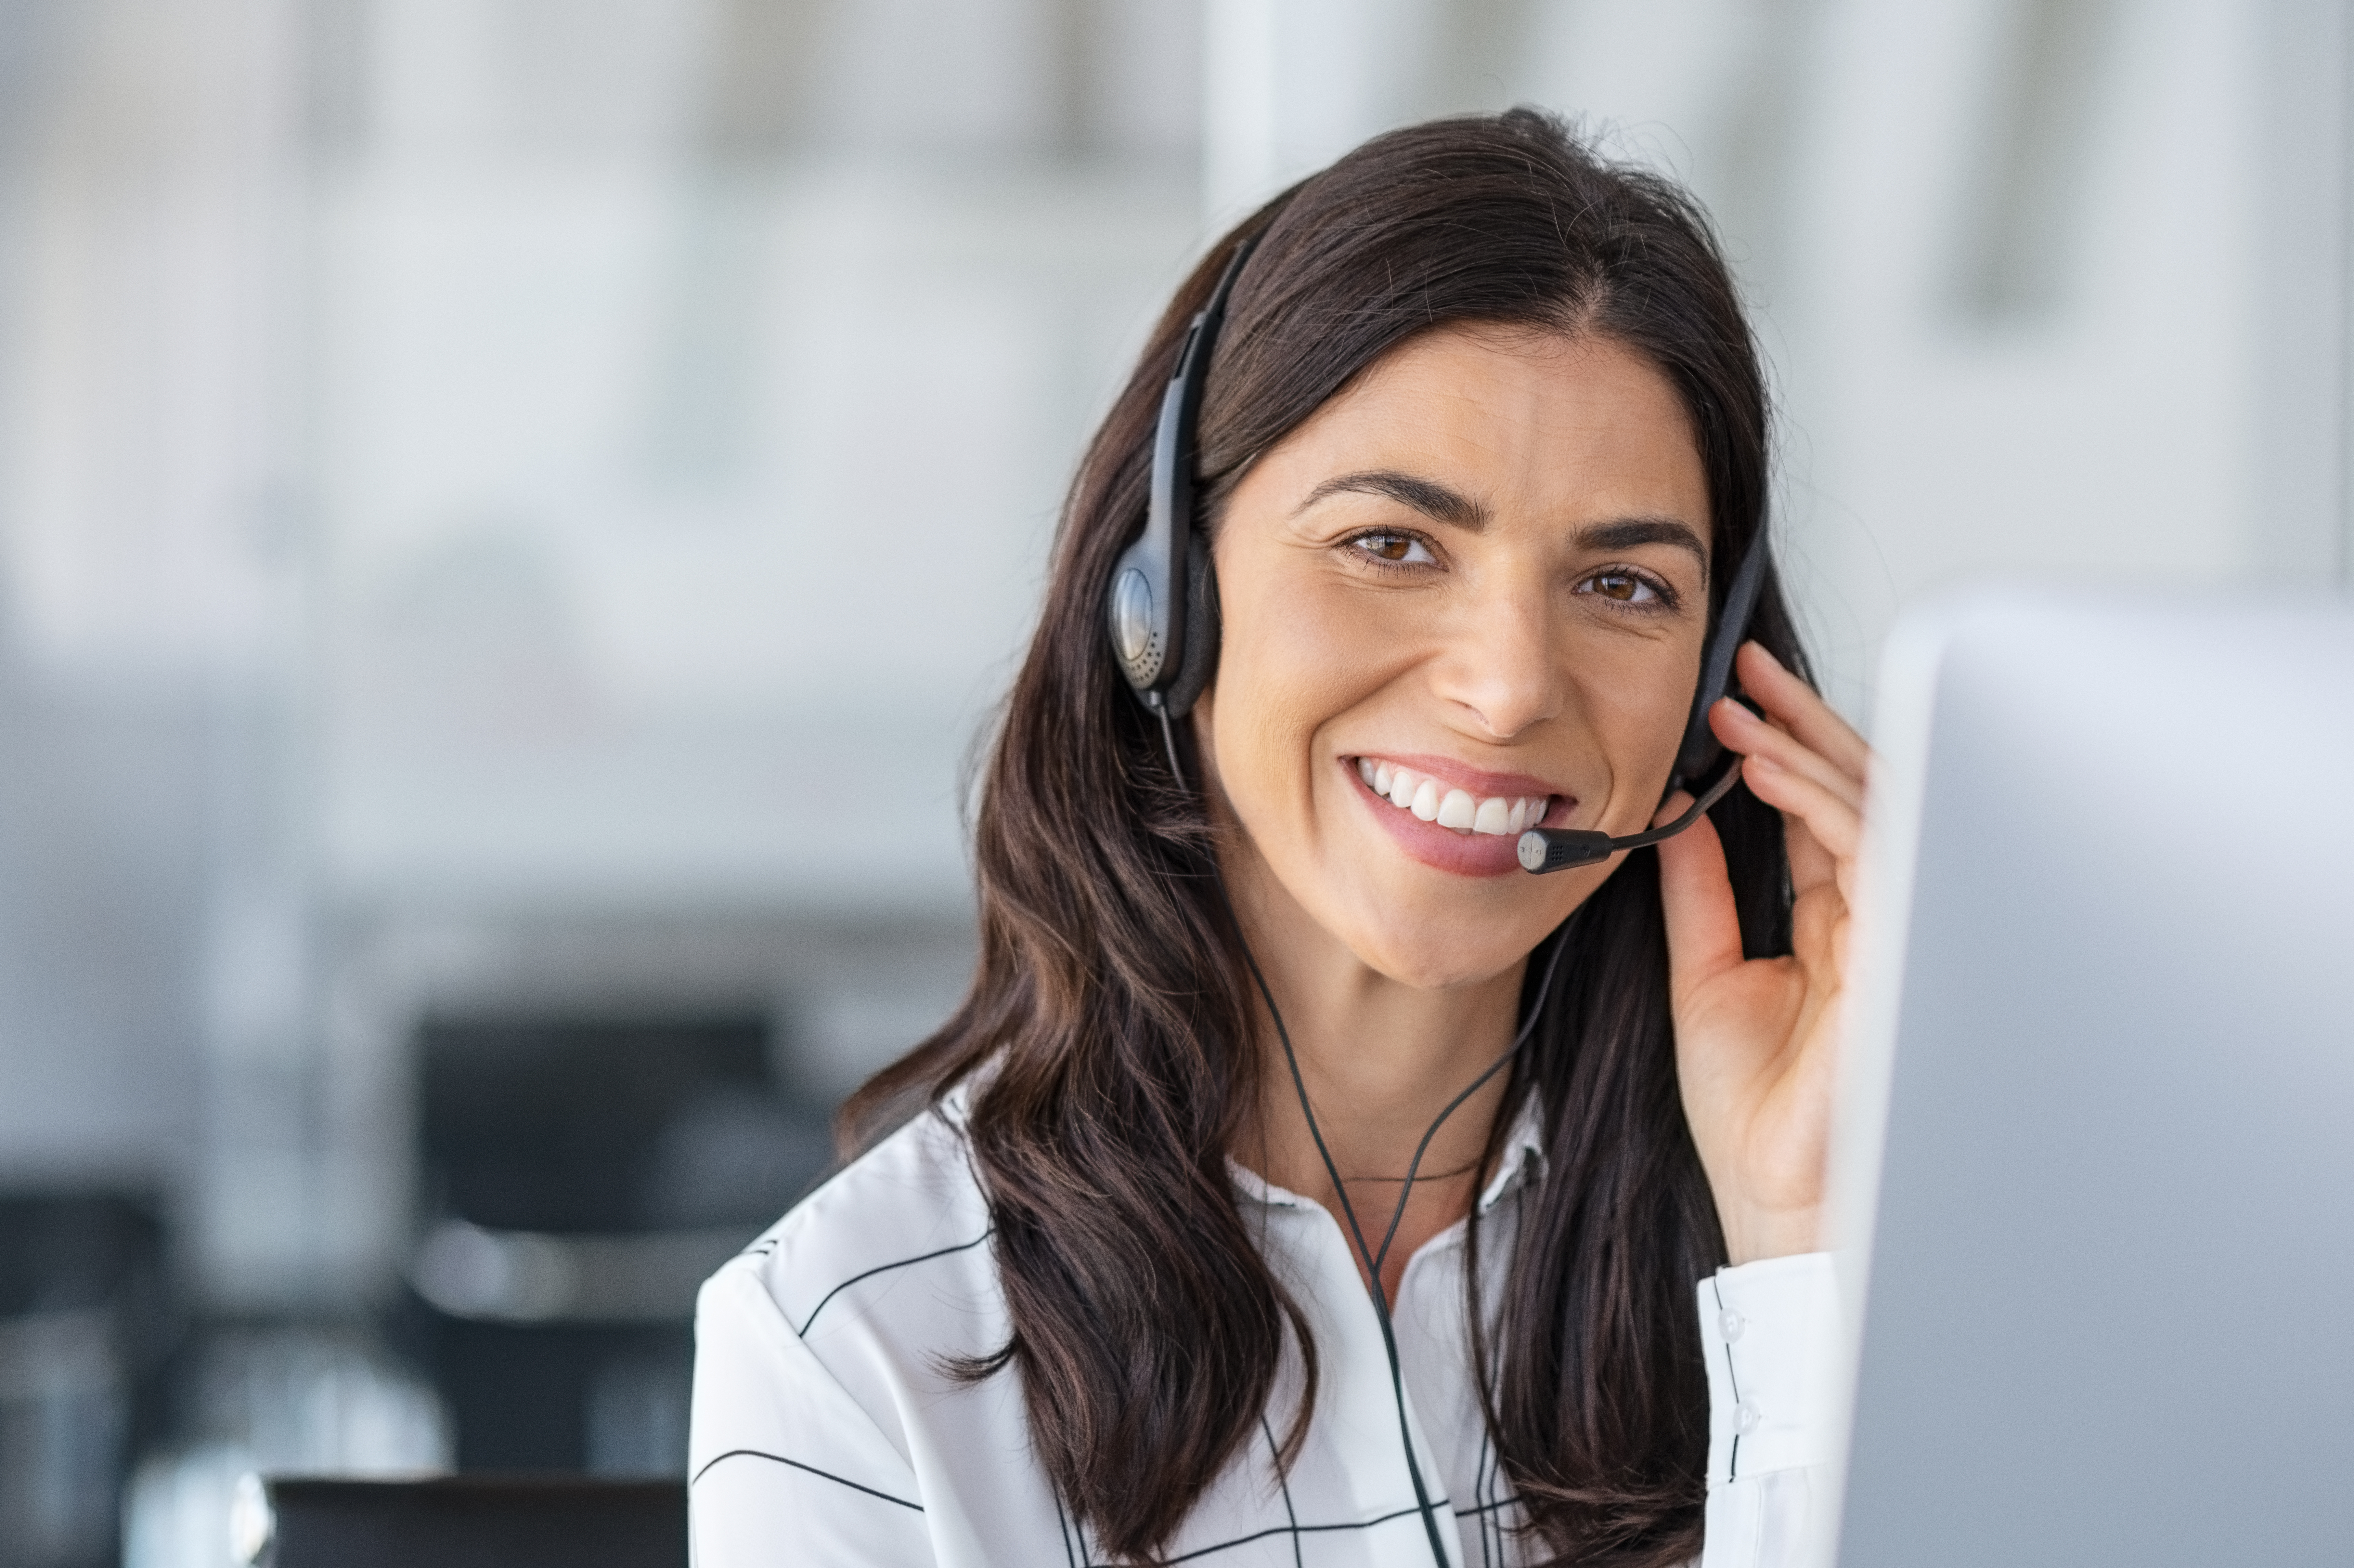 bigstock-Call-center-agent-with-headset-343674517-1